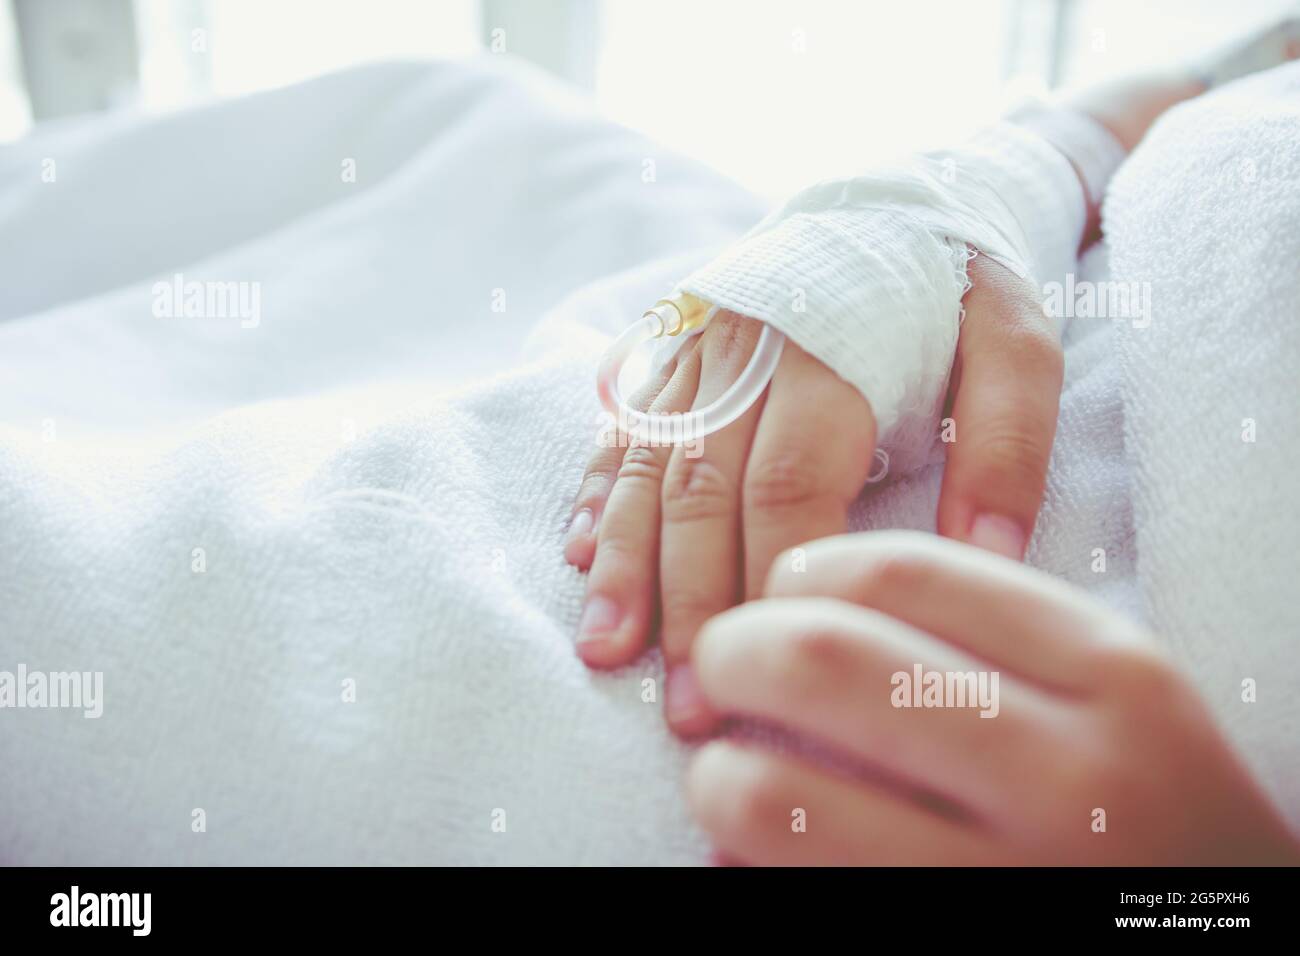 Close up of saline intravenous (iv) drip in a child's patient hand. Health care and people concept. Vintage tone. Stock Photo